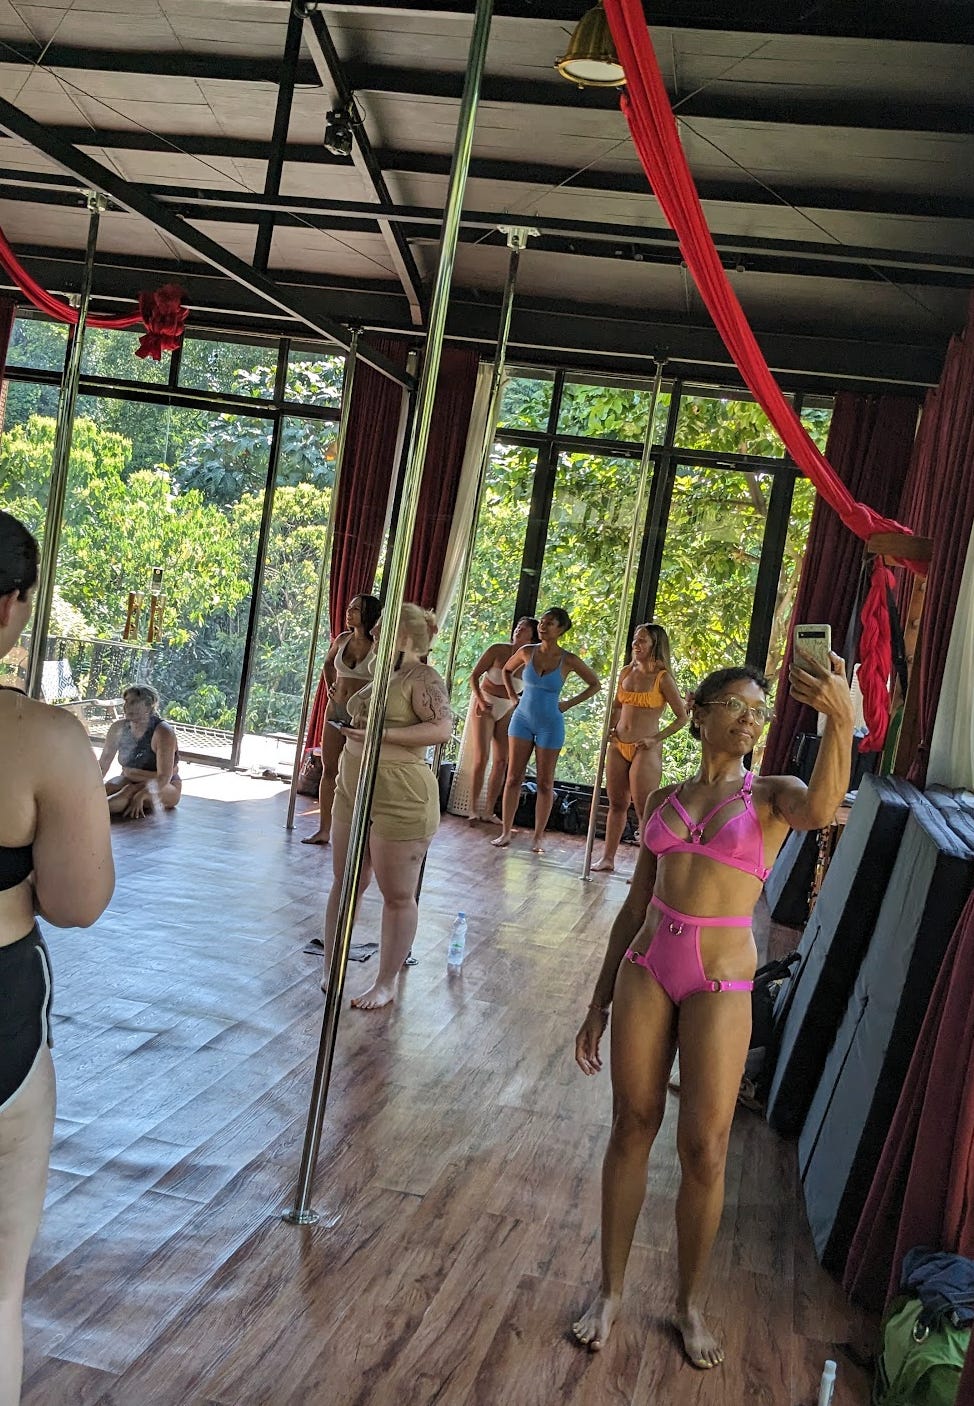 Nathalie snaps a photo of herself in front of the large window in sun-filled pole dancing studio that is filled with other femmes. Nathalie is wearing a bright hot pink underwear set that has silver buckles. Some people in the background are wearing their own colorful sets including a sky blue sports bra and biker shorts and mustard yellow underwear set